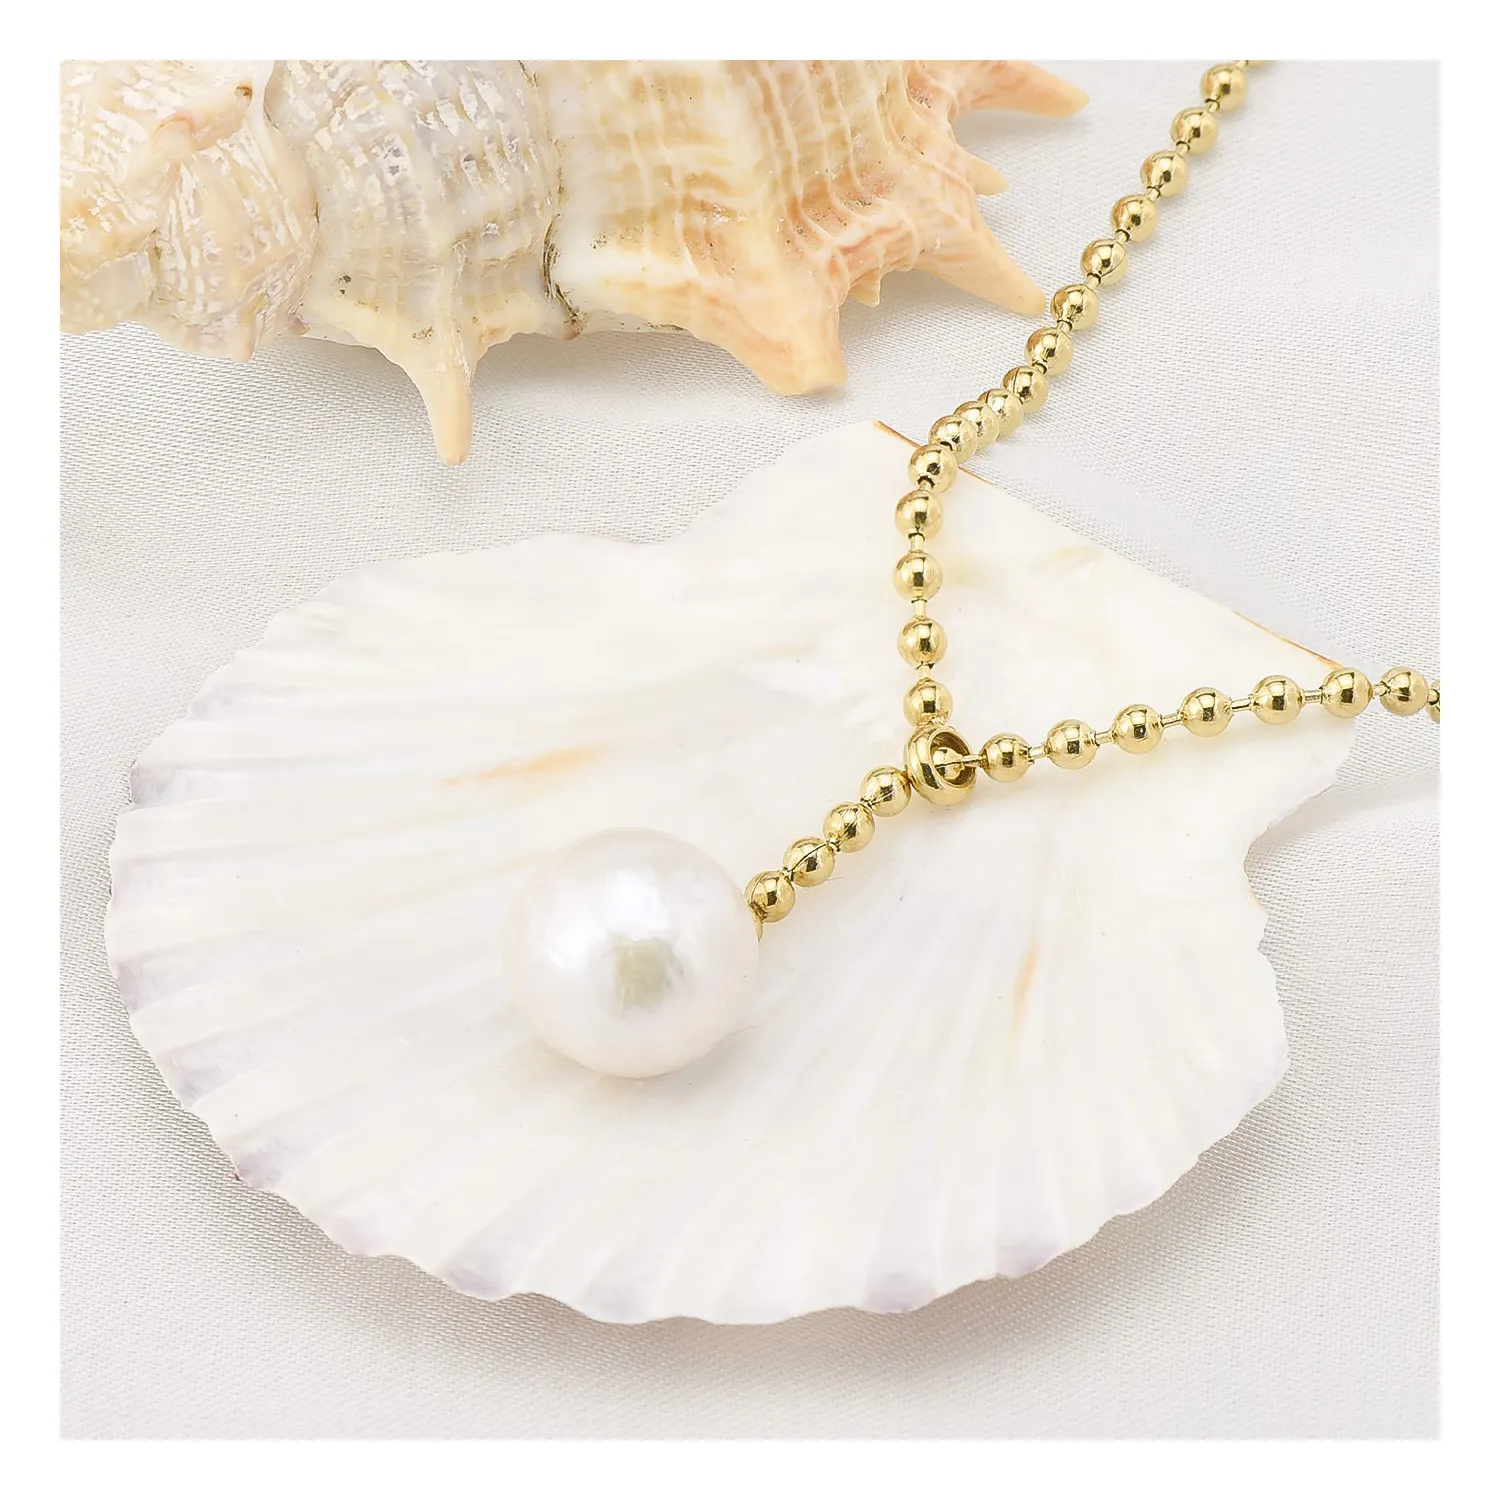 big baroque pearl necklace long stainless steel ball chain statement luxury adjustable necklace pearl baroque